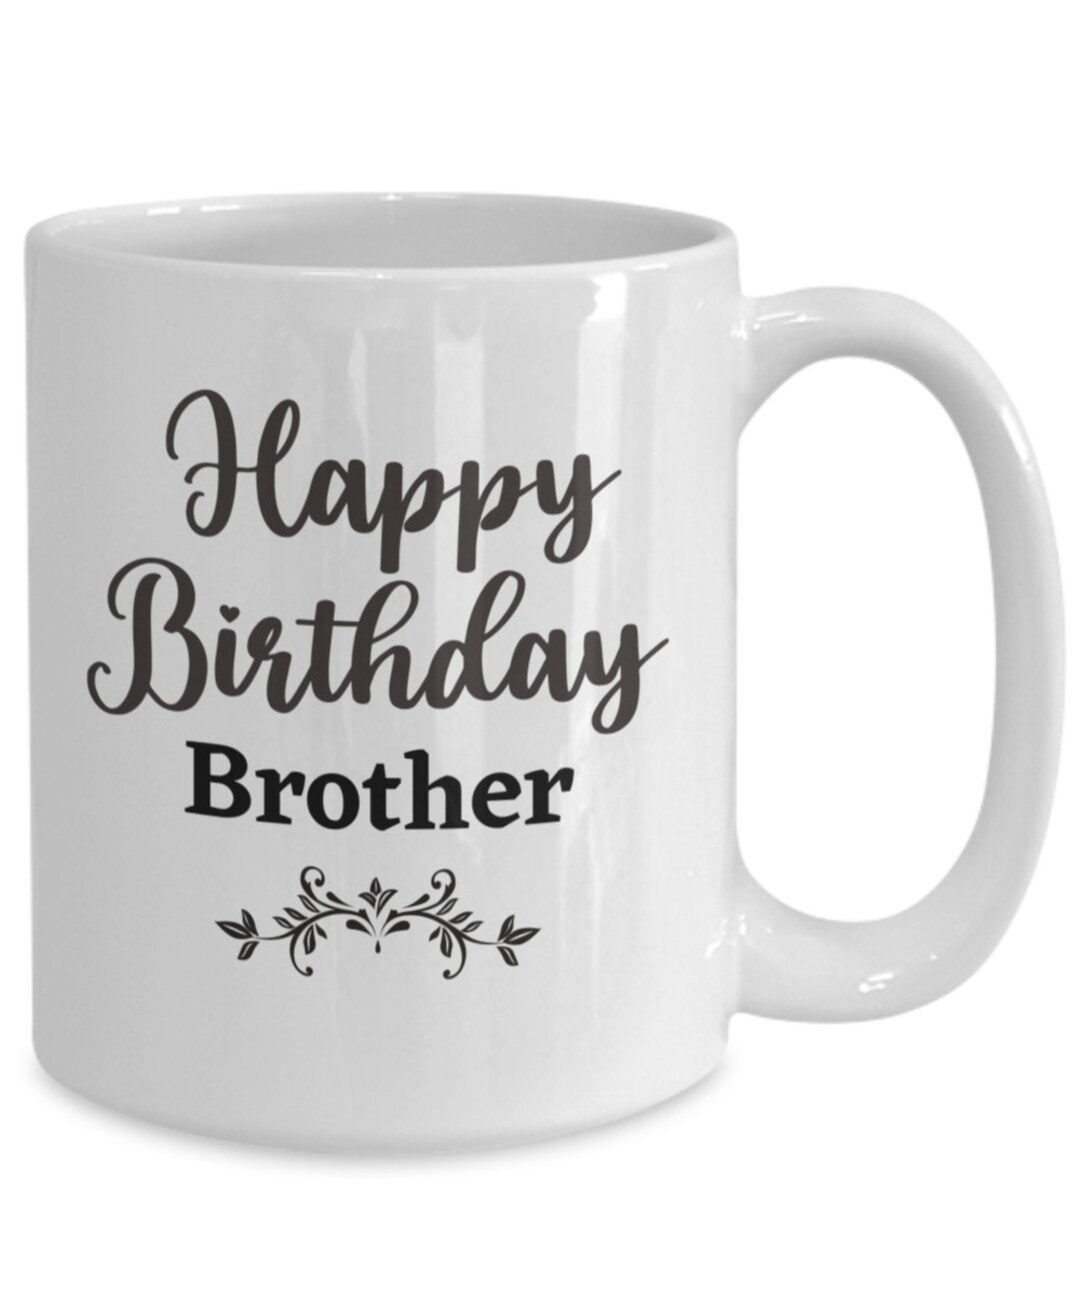 happy-birthday-brother-gift-ideas-for-brother-from-sister-etsy